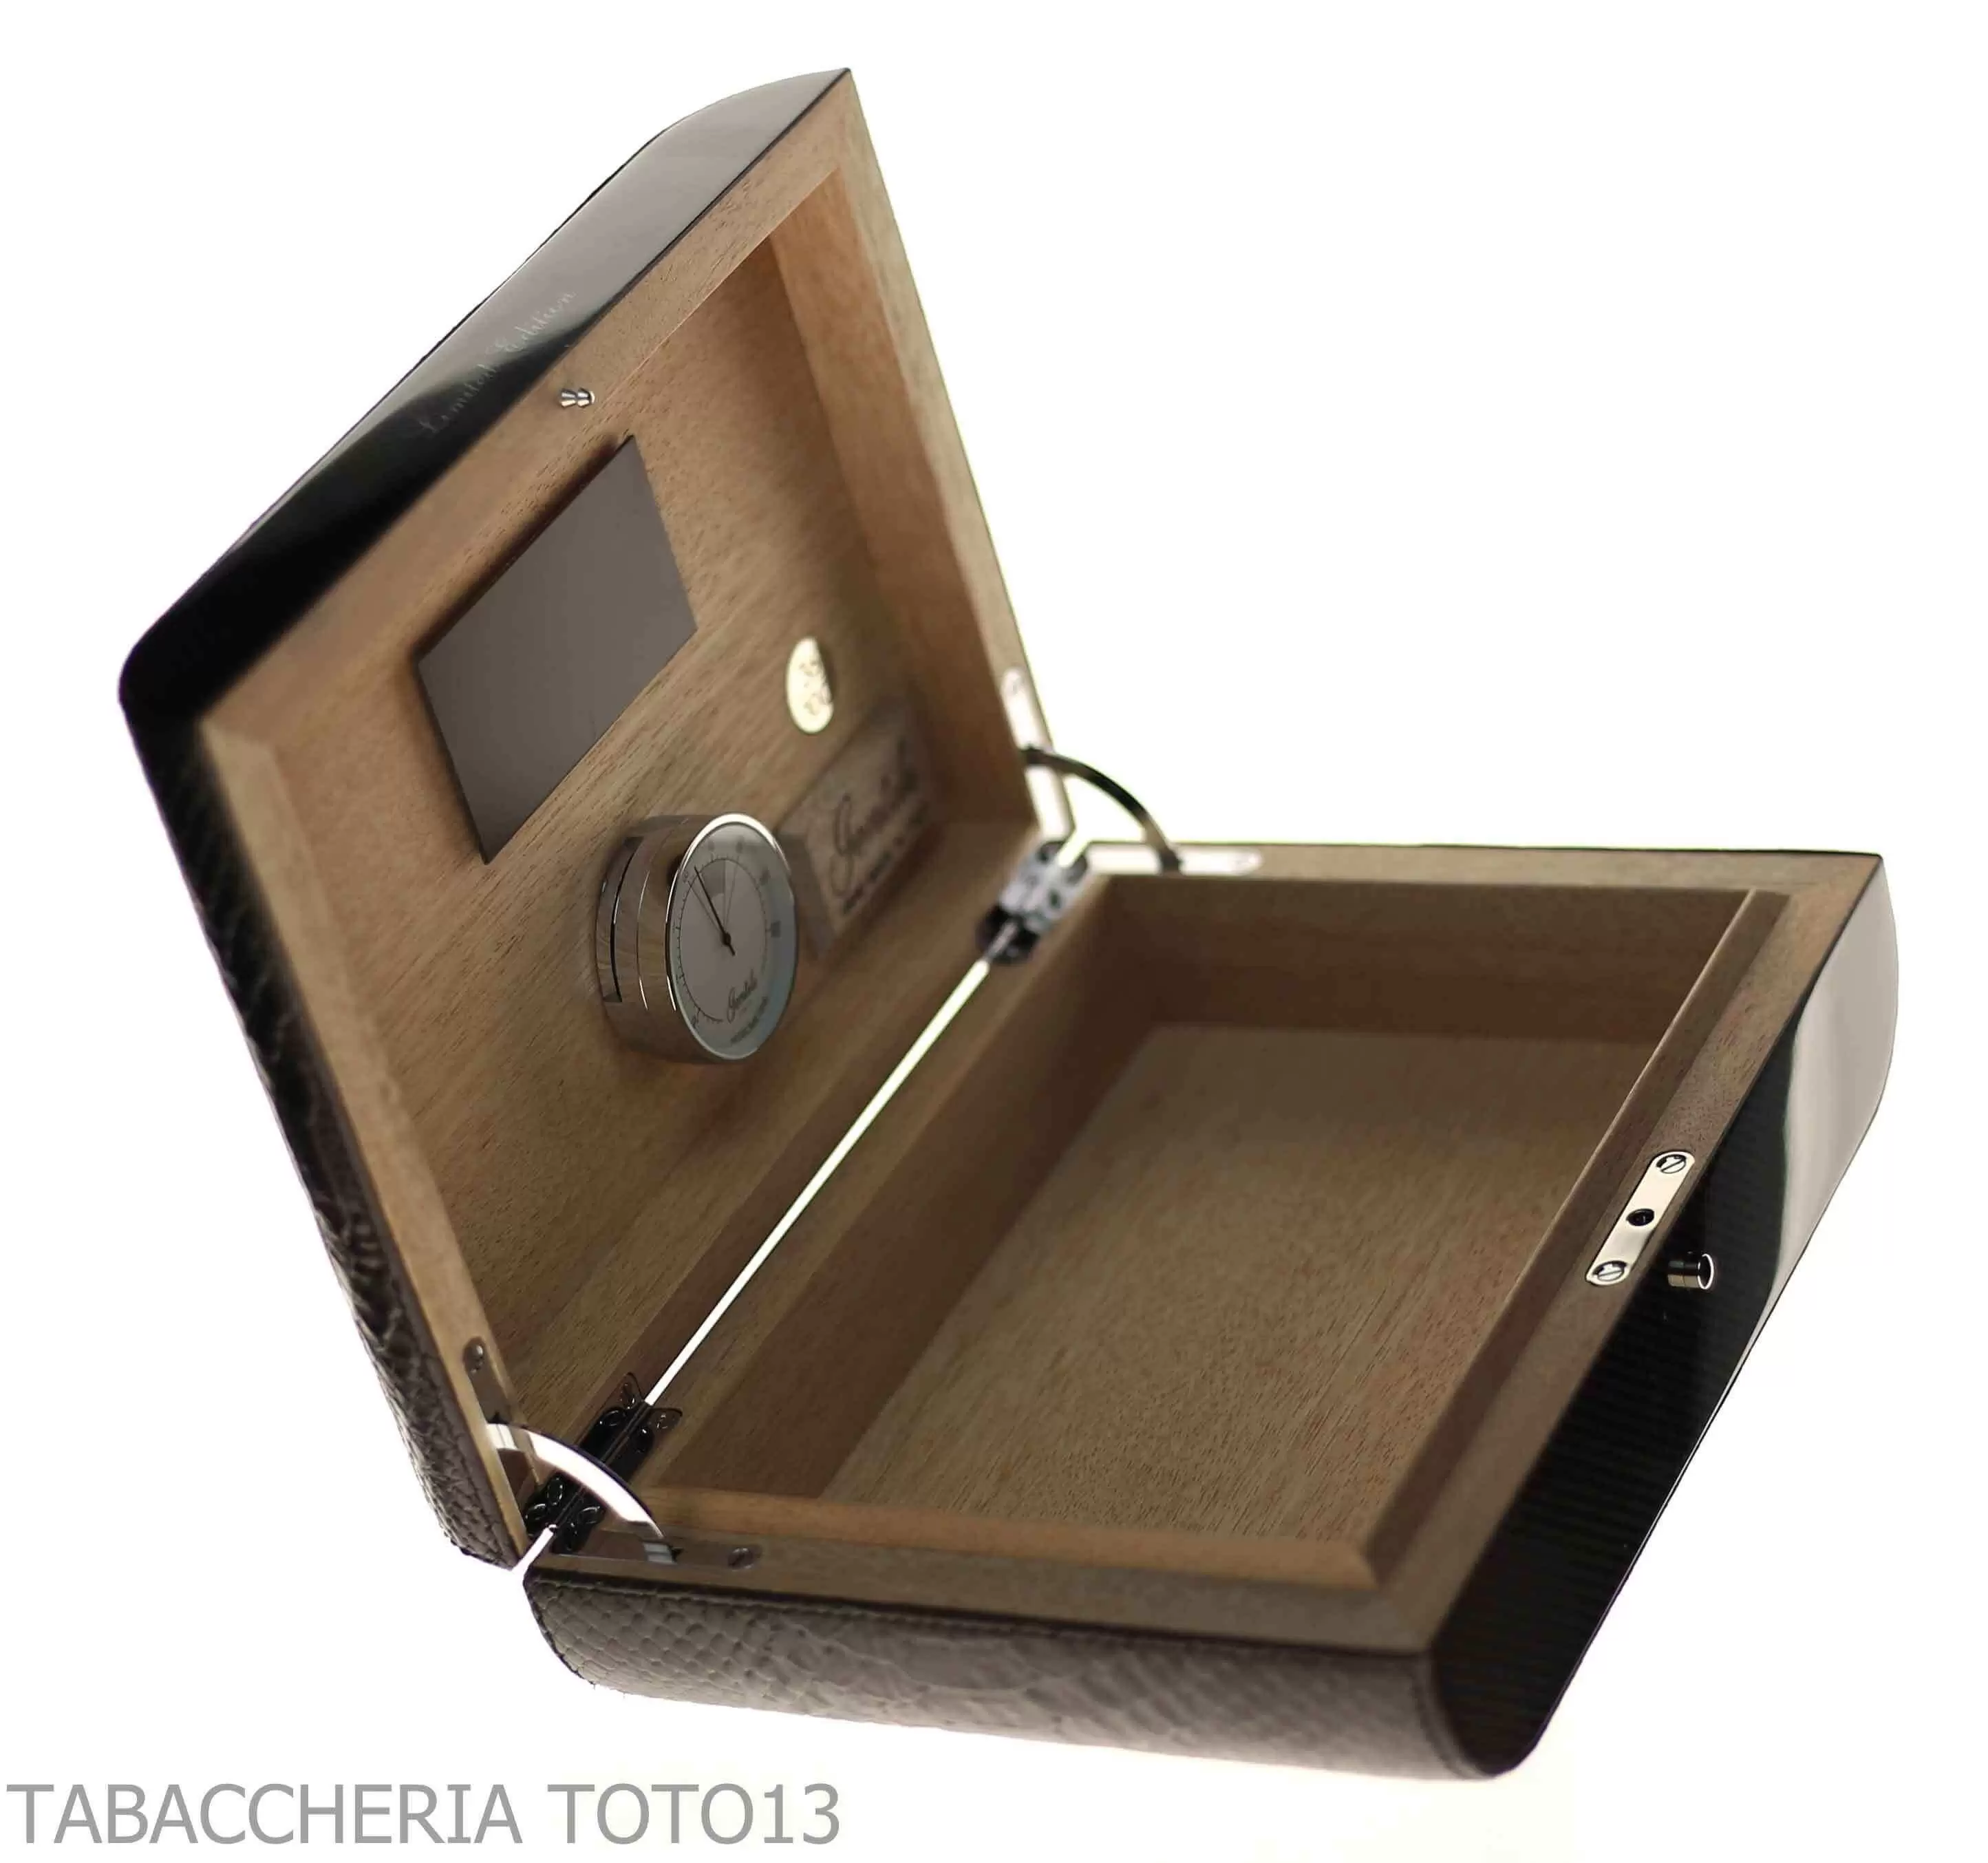 Gentili humidified light beech box for cigars with hygrometer